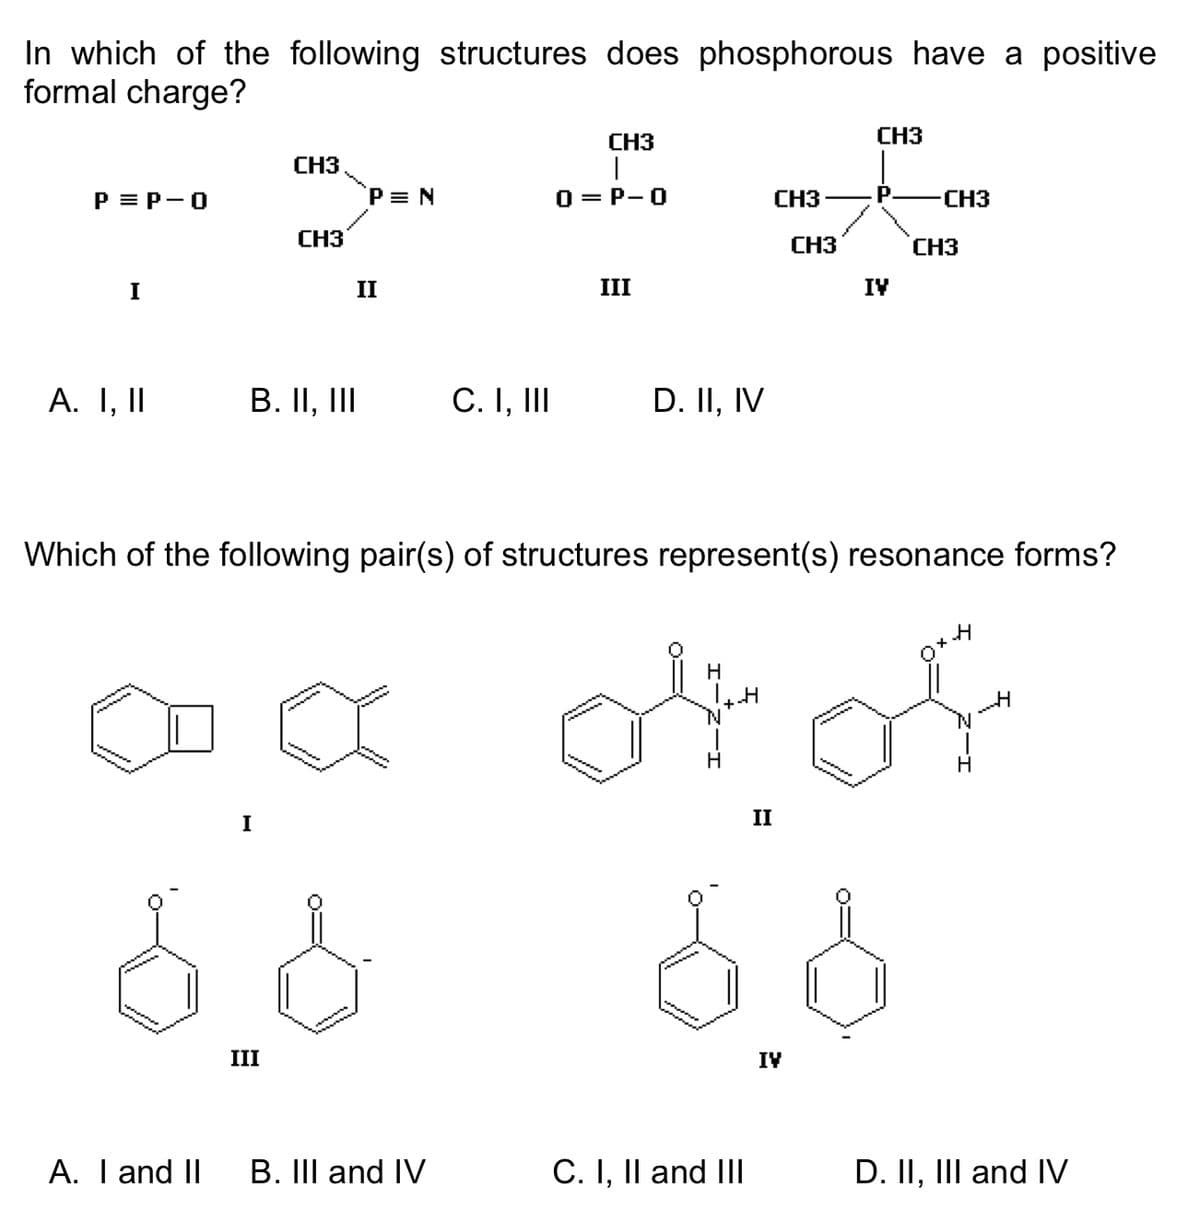 In which of the following structures does phosphorous have a positive
formal charge?
P = P-O
I
A. I, II
~m
******
Sonnen
A. I and II
CH3
B. II, III
I
CH3
III
P = N
II
C. I, III
CH3
0=P-O
III
D. II, IV
Which of the following pair(s) of structures represent(s) resonance forms?
H
of of
CH3
B. III and IV C. I, II and III
CH3
II
CH3
IV
5.8
IV
-CH3
CH3
D. II, III and IV